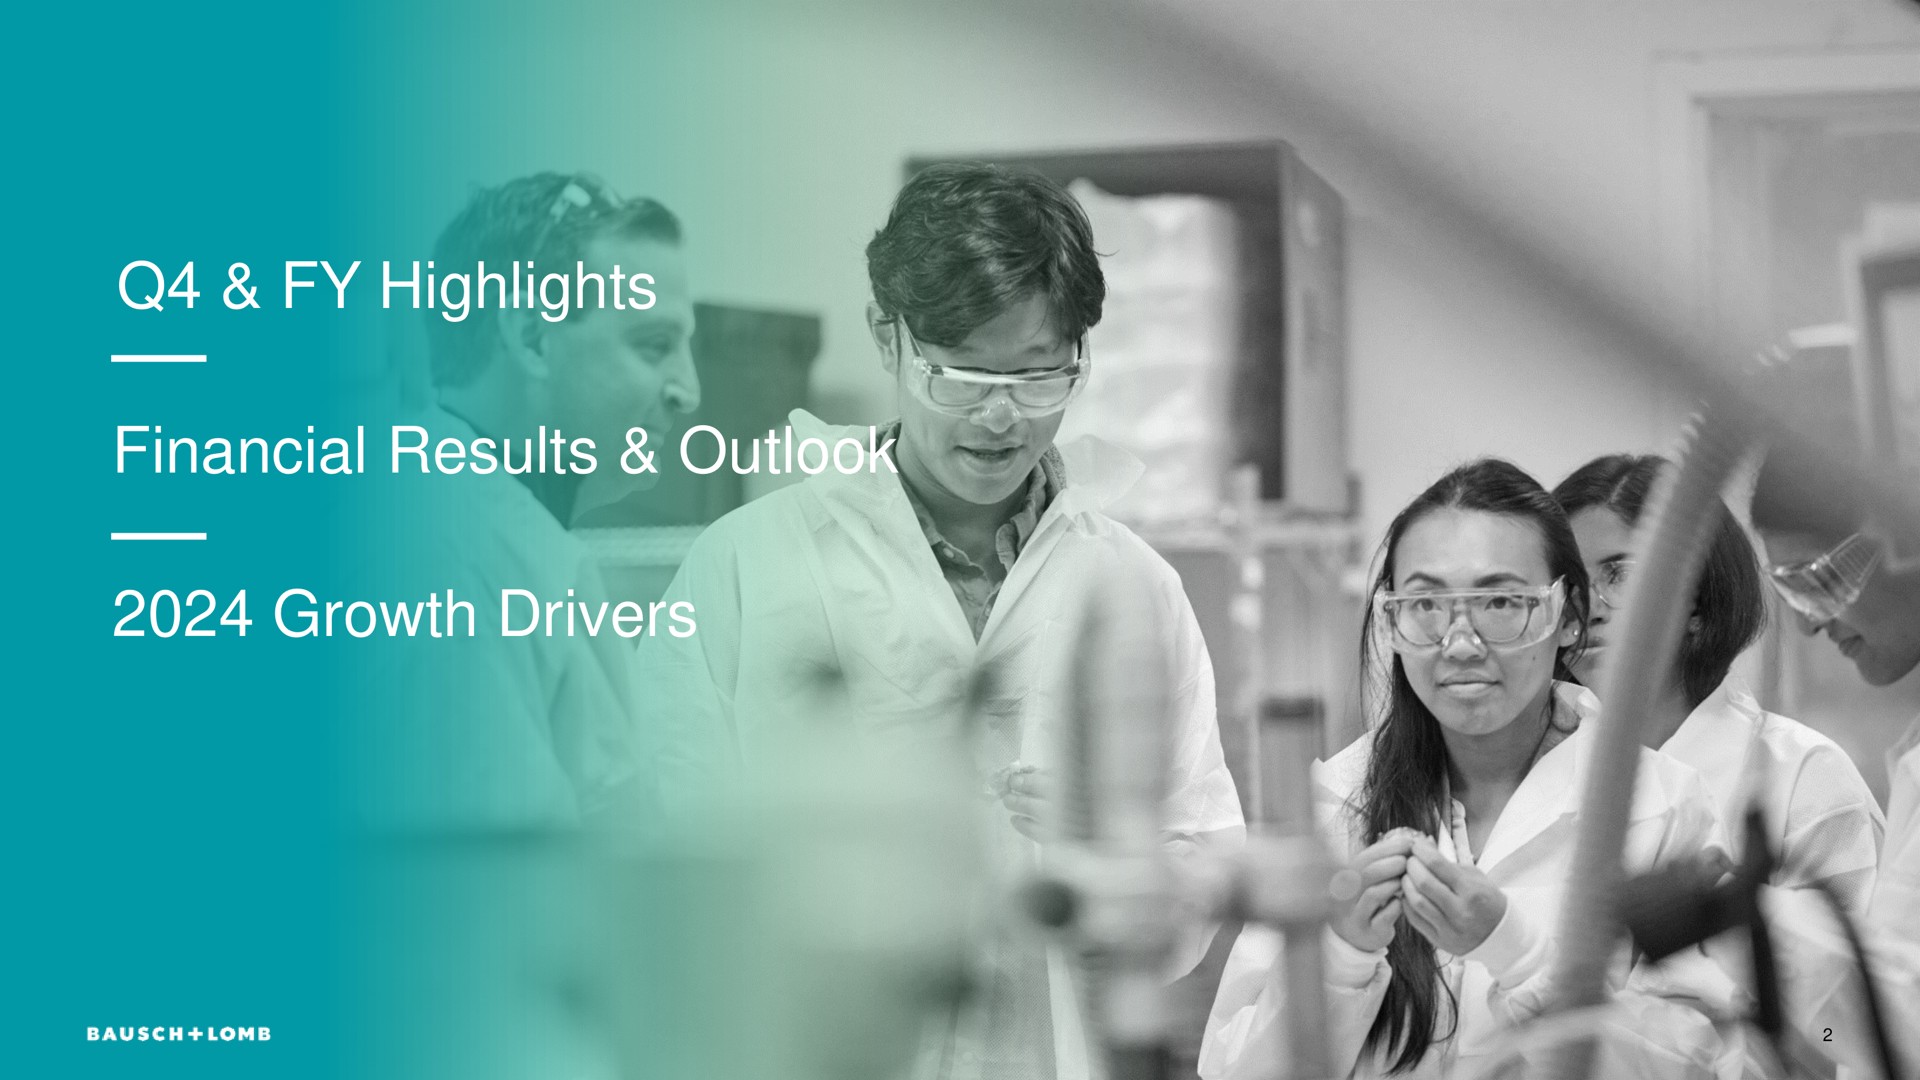 highlights financial results outlook growth drivers | Bausch+Lomb